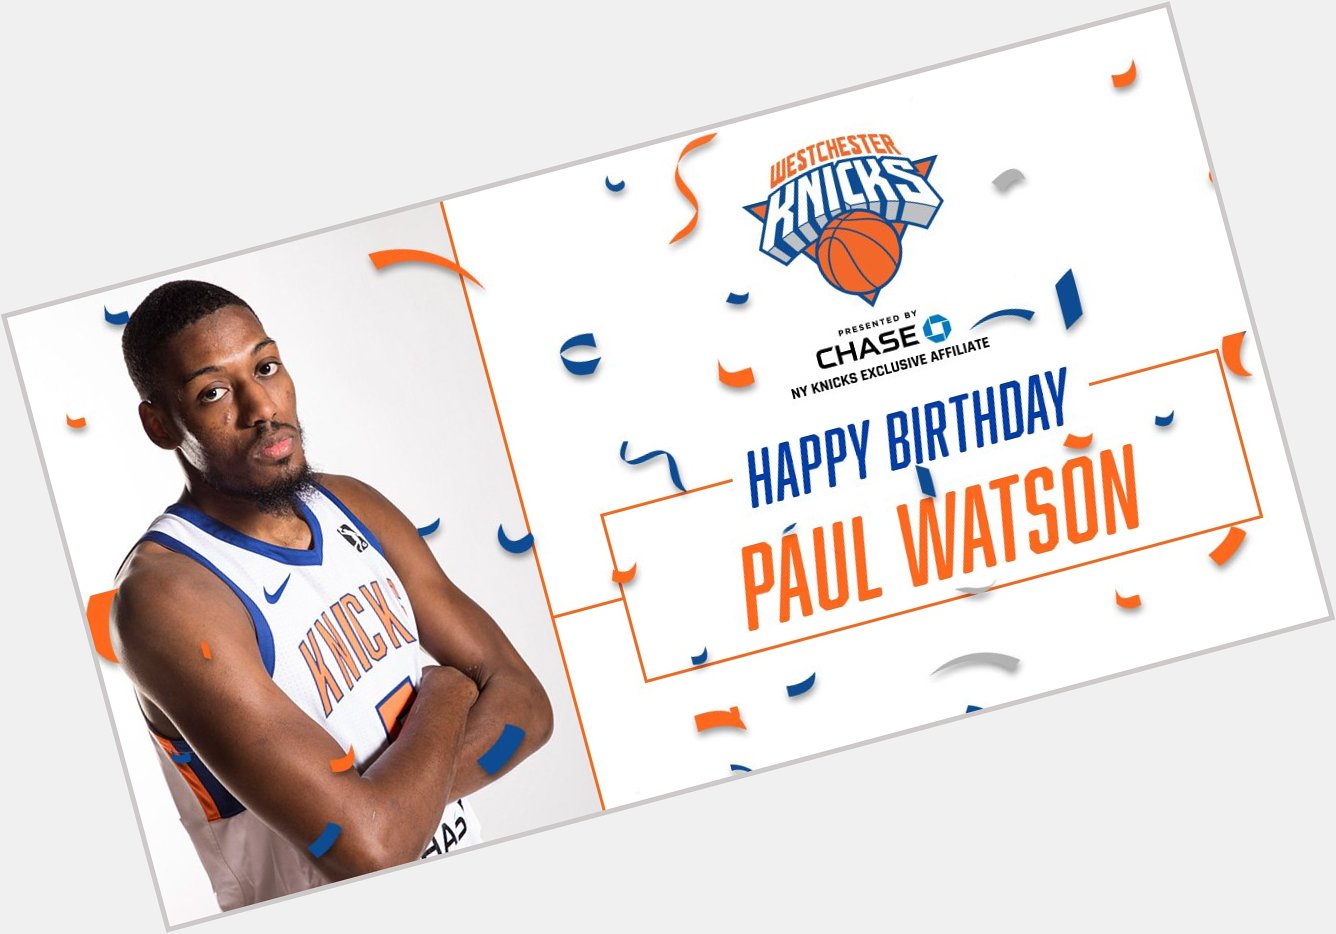 More to celebrate! We have a birthday - have a happy one Paul Watson! 